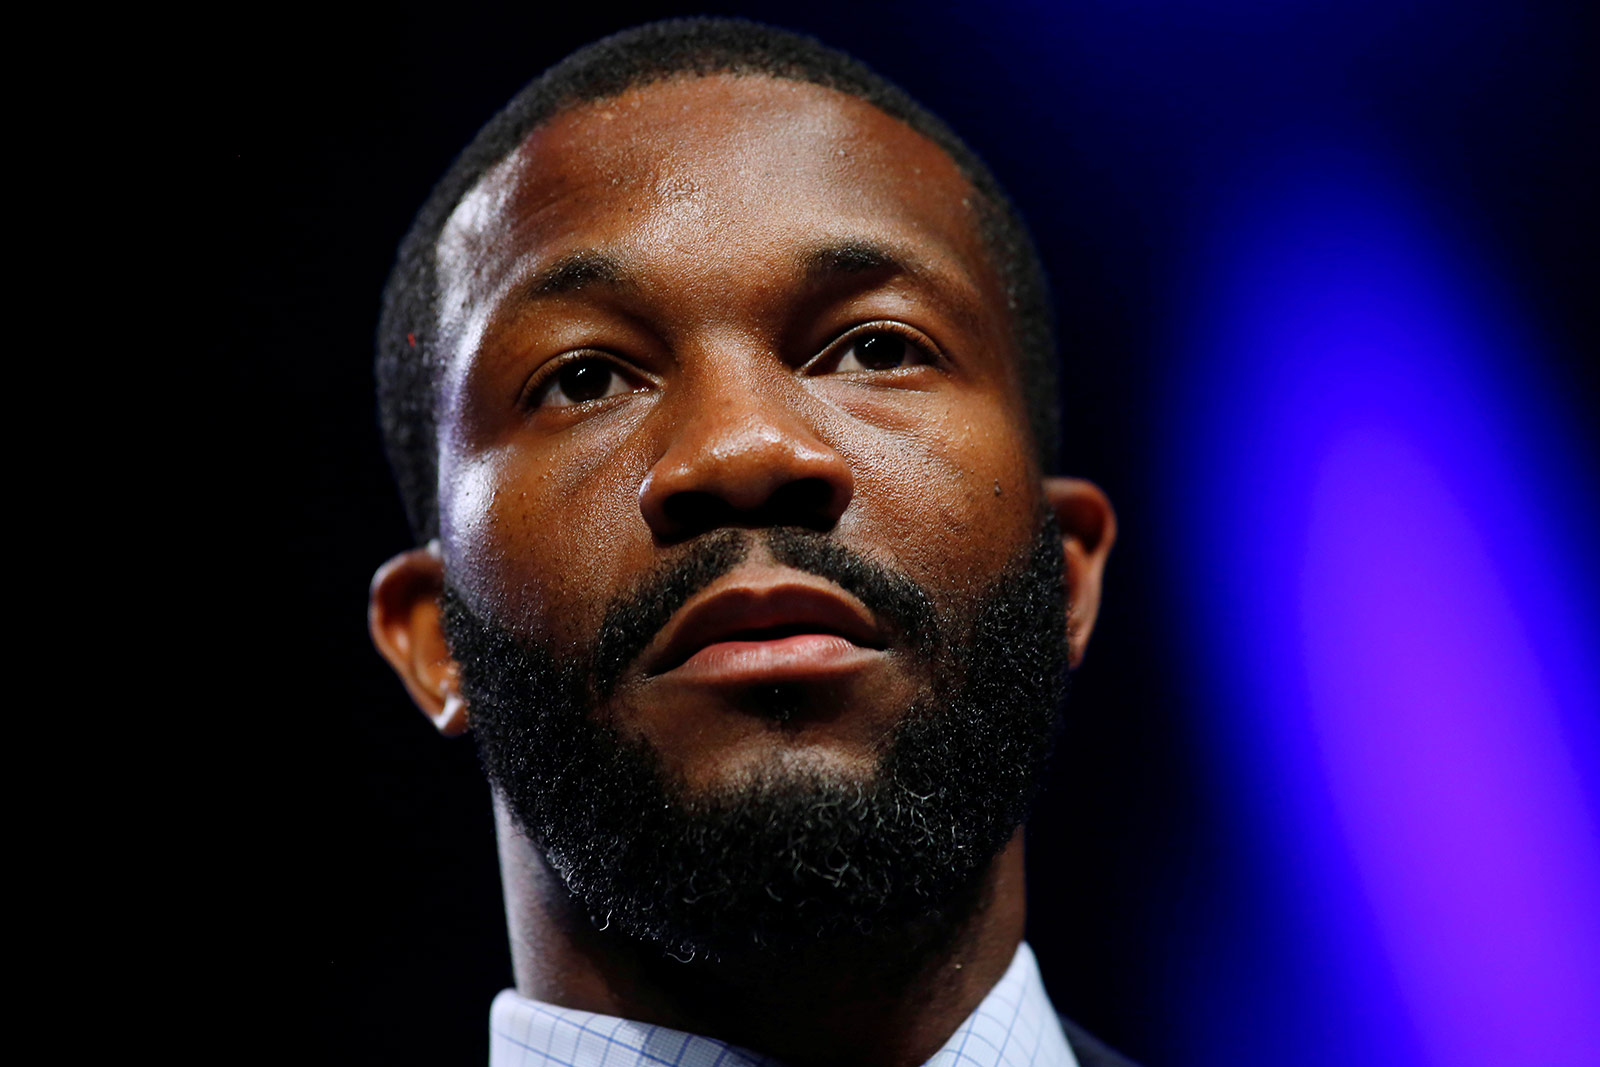 Birmingham Mayor Randall Woodfin, pictured in 2018, has been hospitalized after testing positive for coronavirus.